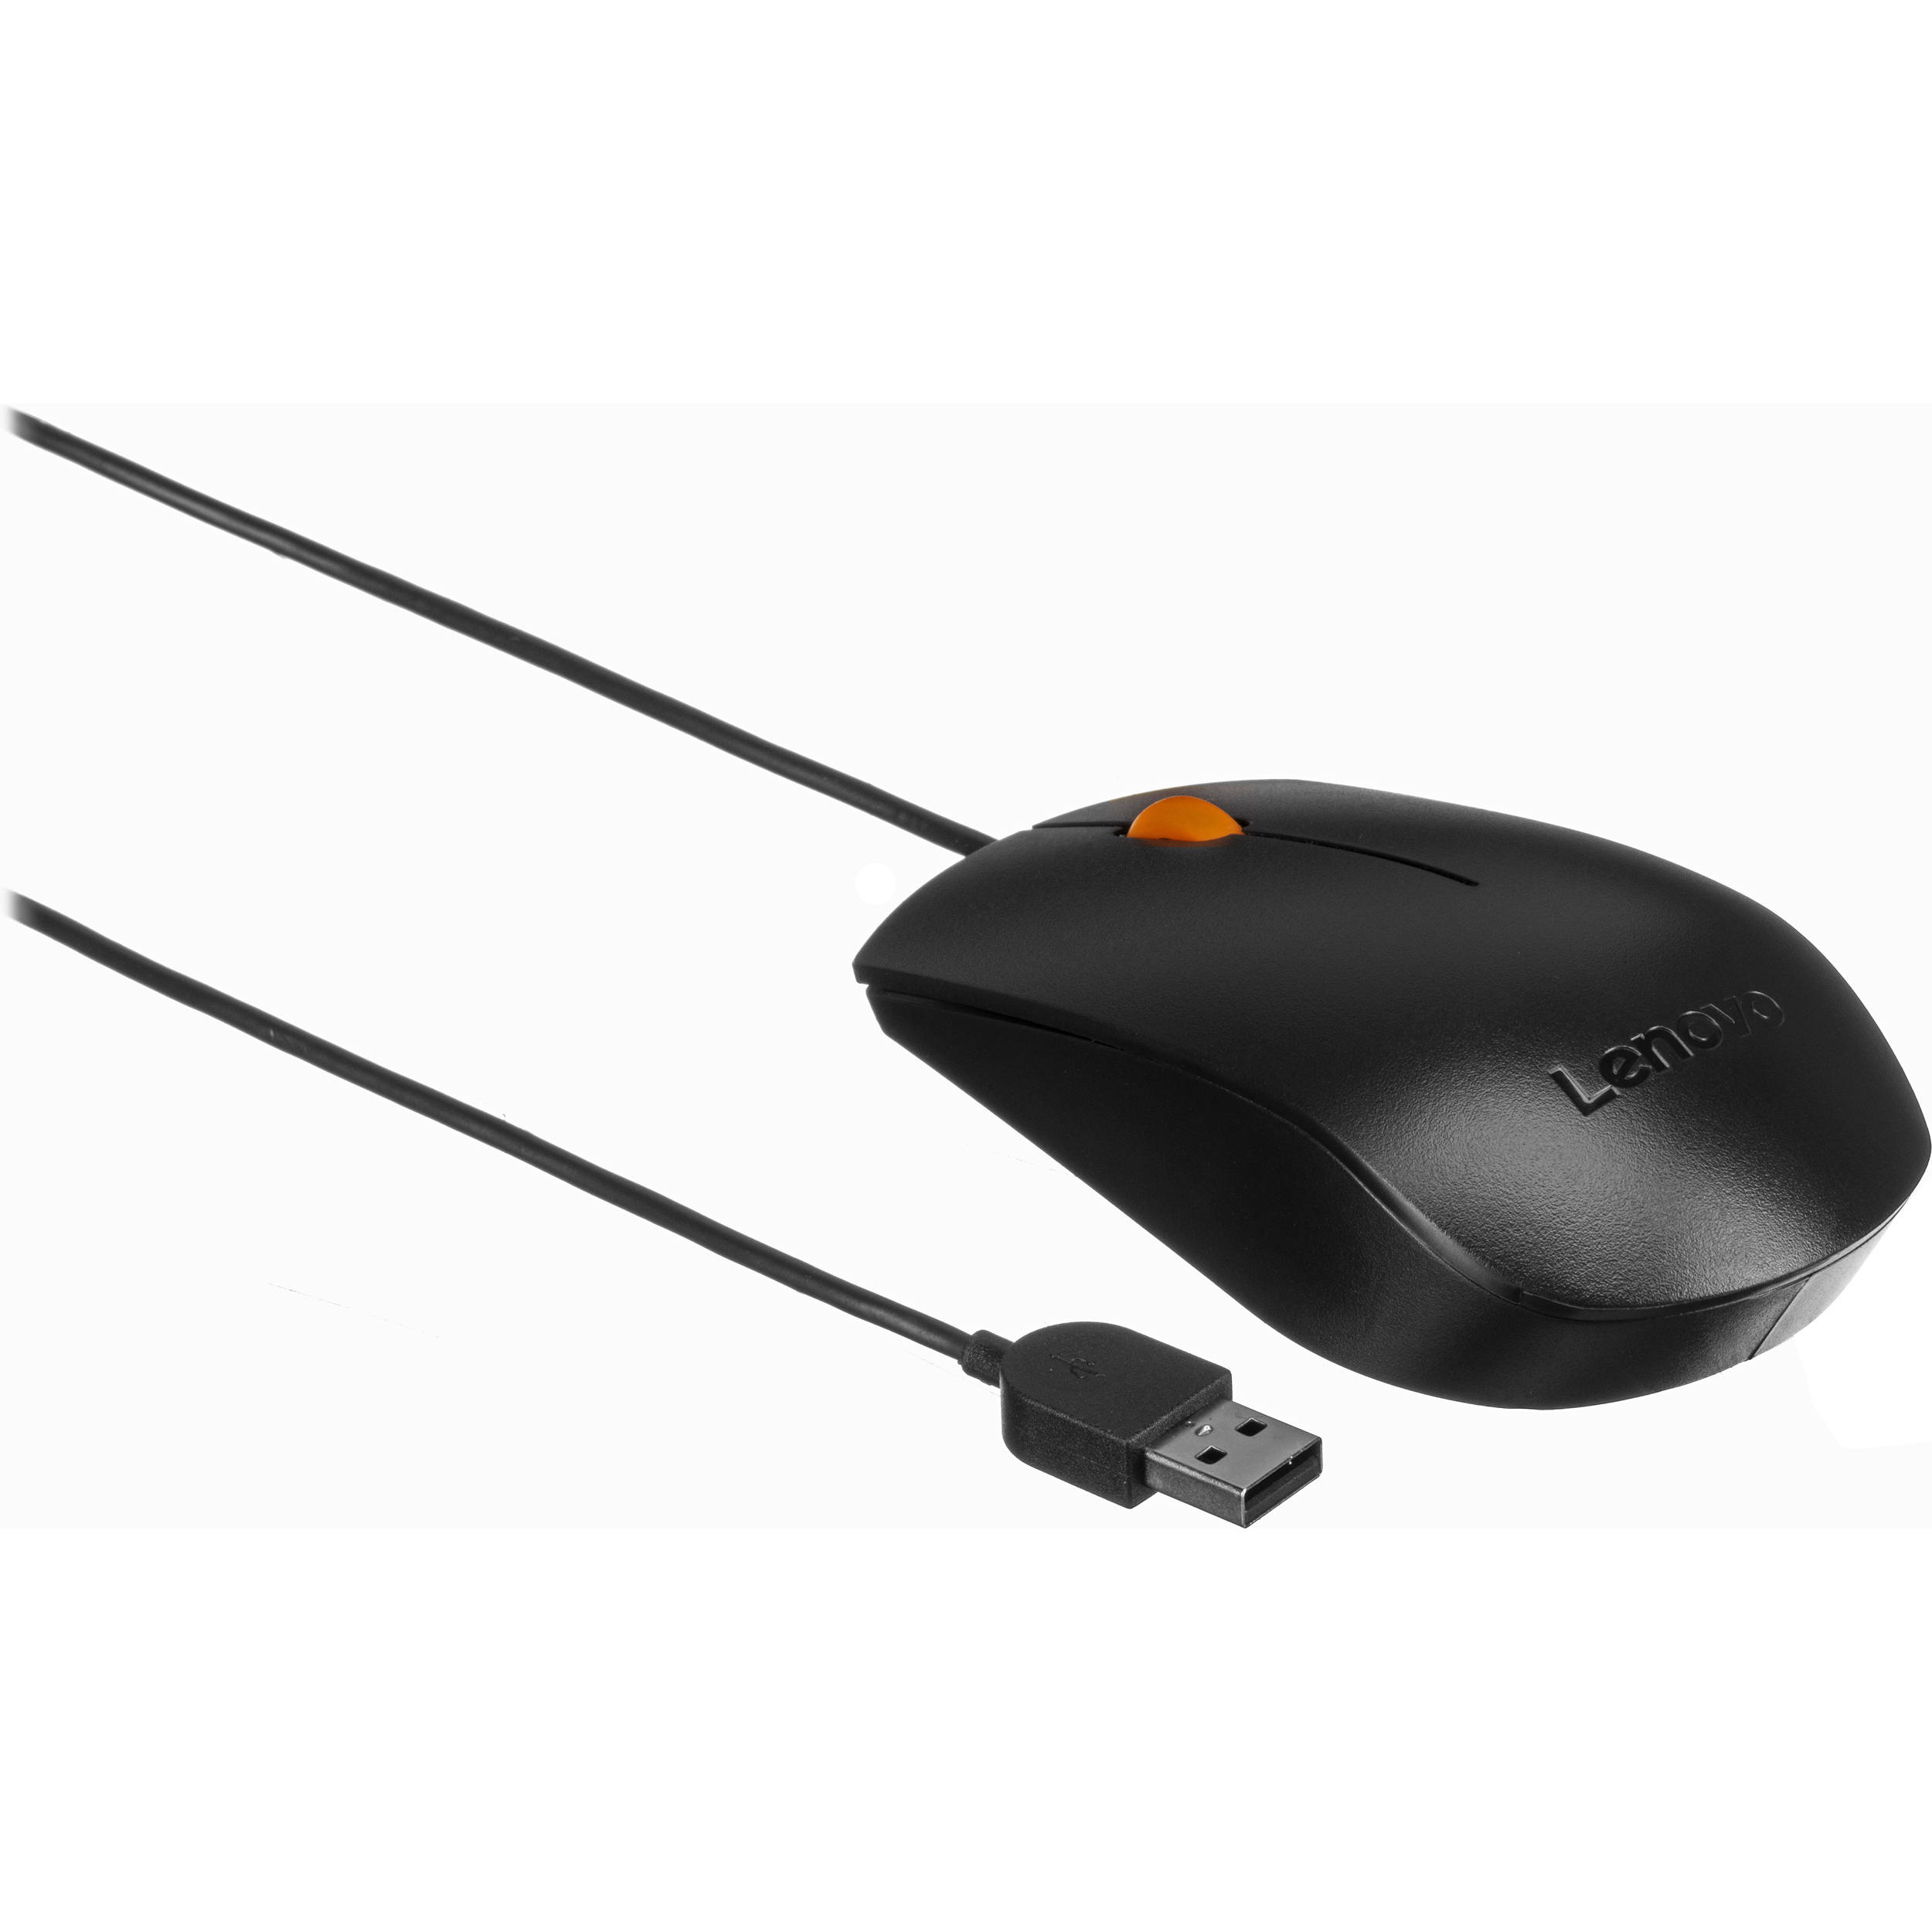 Lenovo 300 Wired USB Mouse GX30M39704 B&H Photo Video